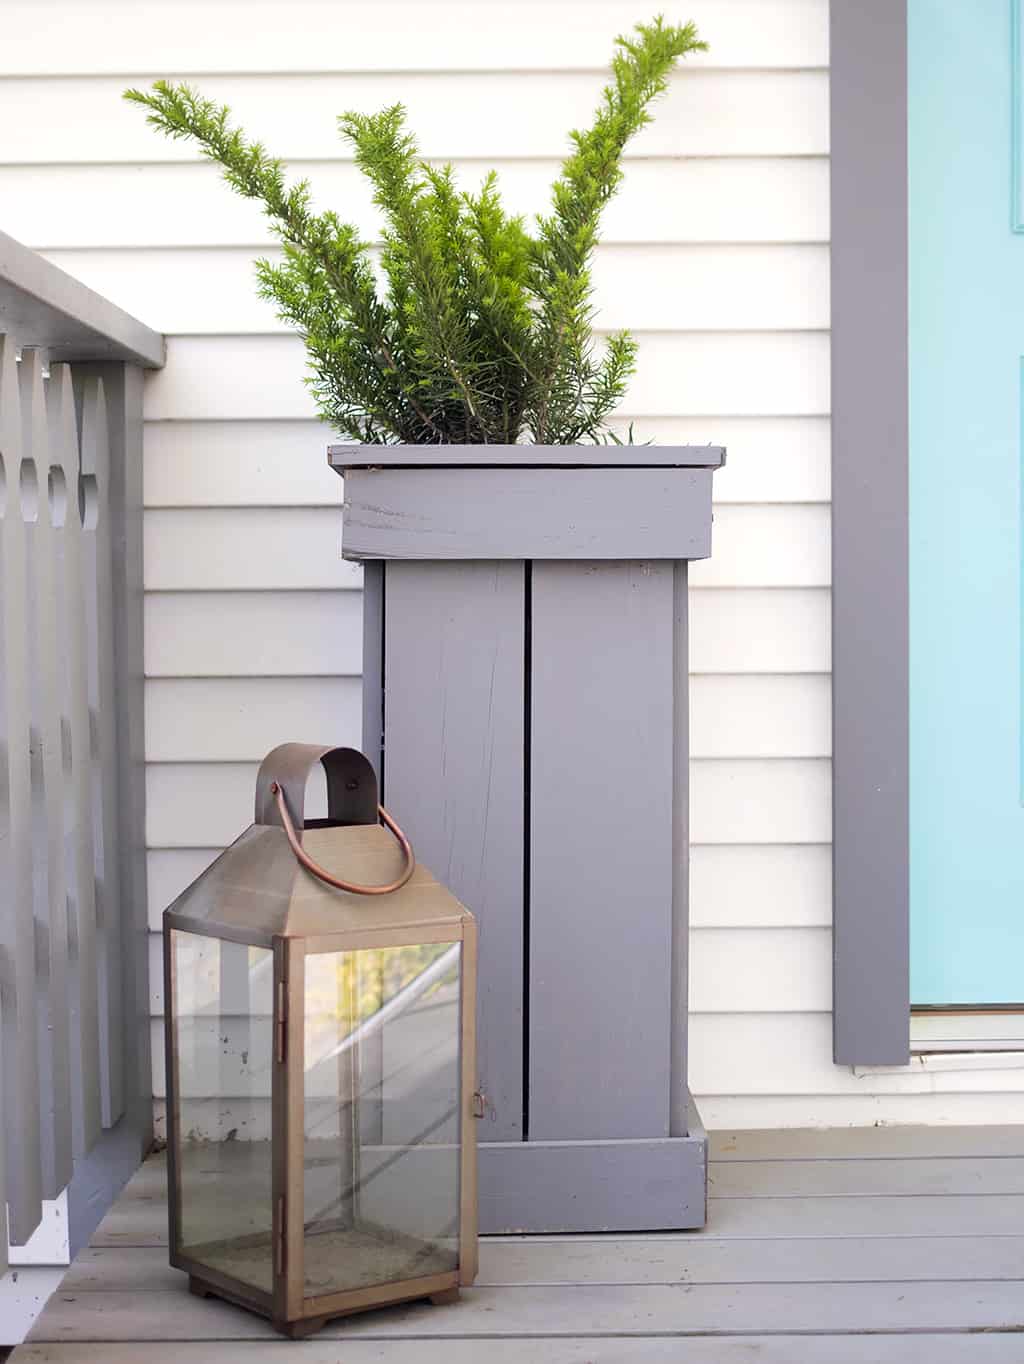 How to Build Tall Outdoor Planters